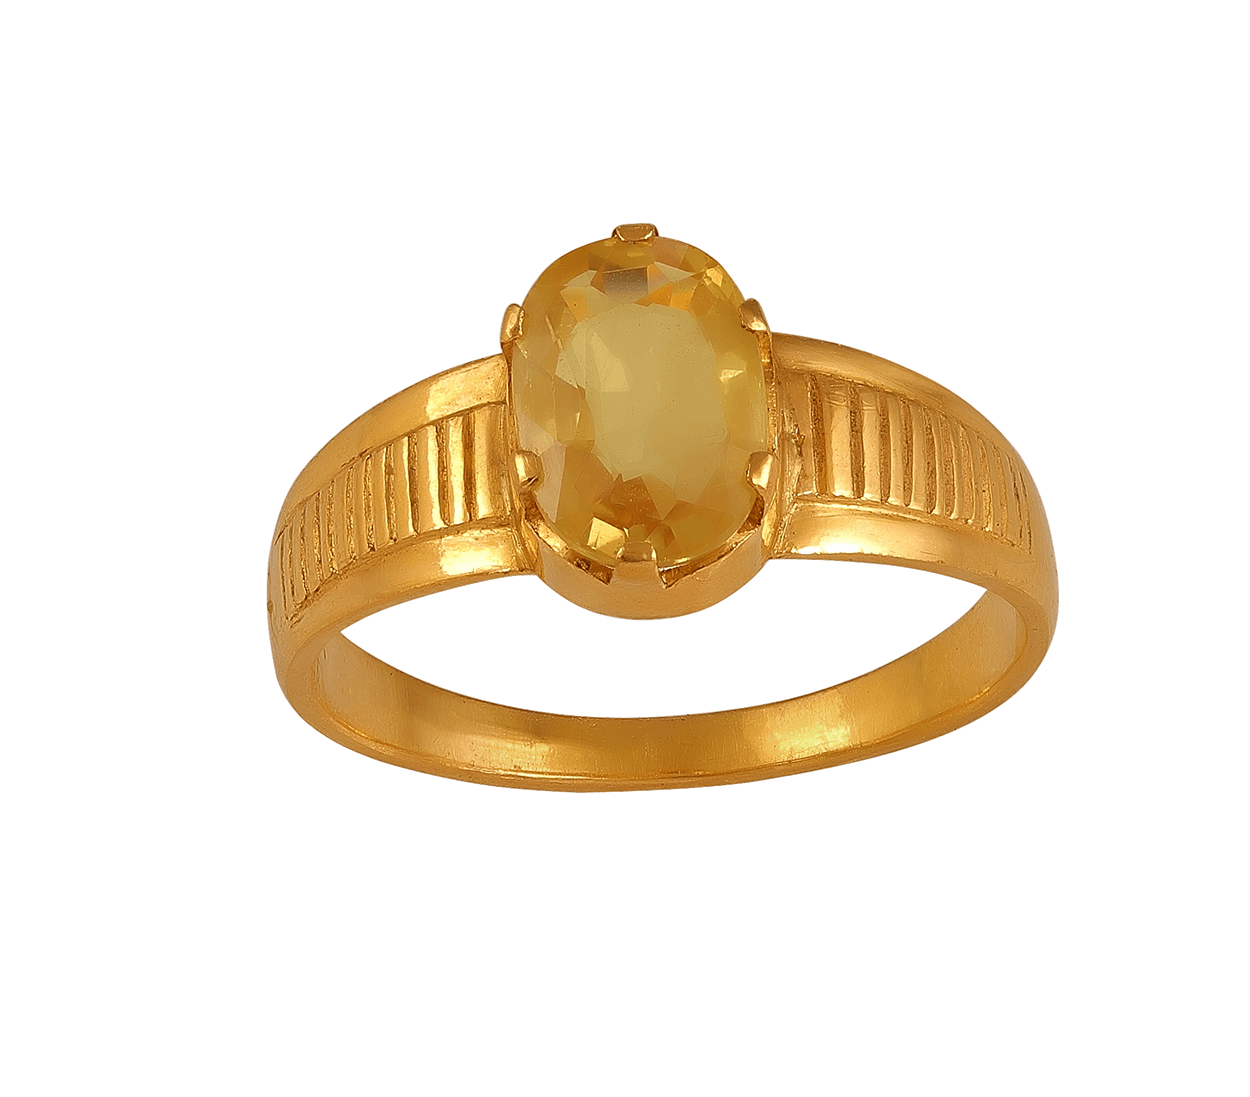 Handcrafted gold ring with vibrant stone accent | Antique gold rings, Gold  jewelry simple, Gold rings jewelry